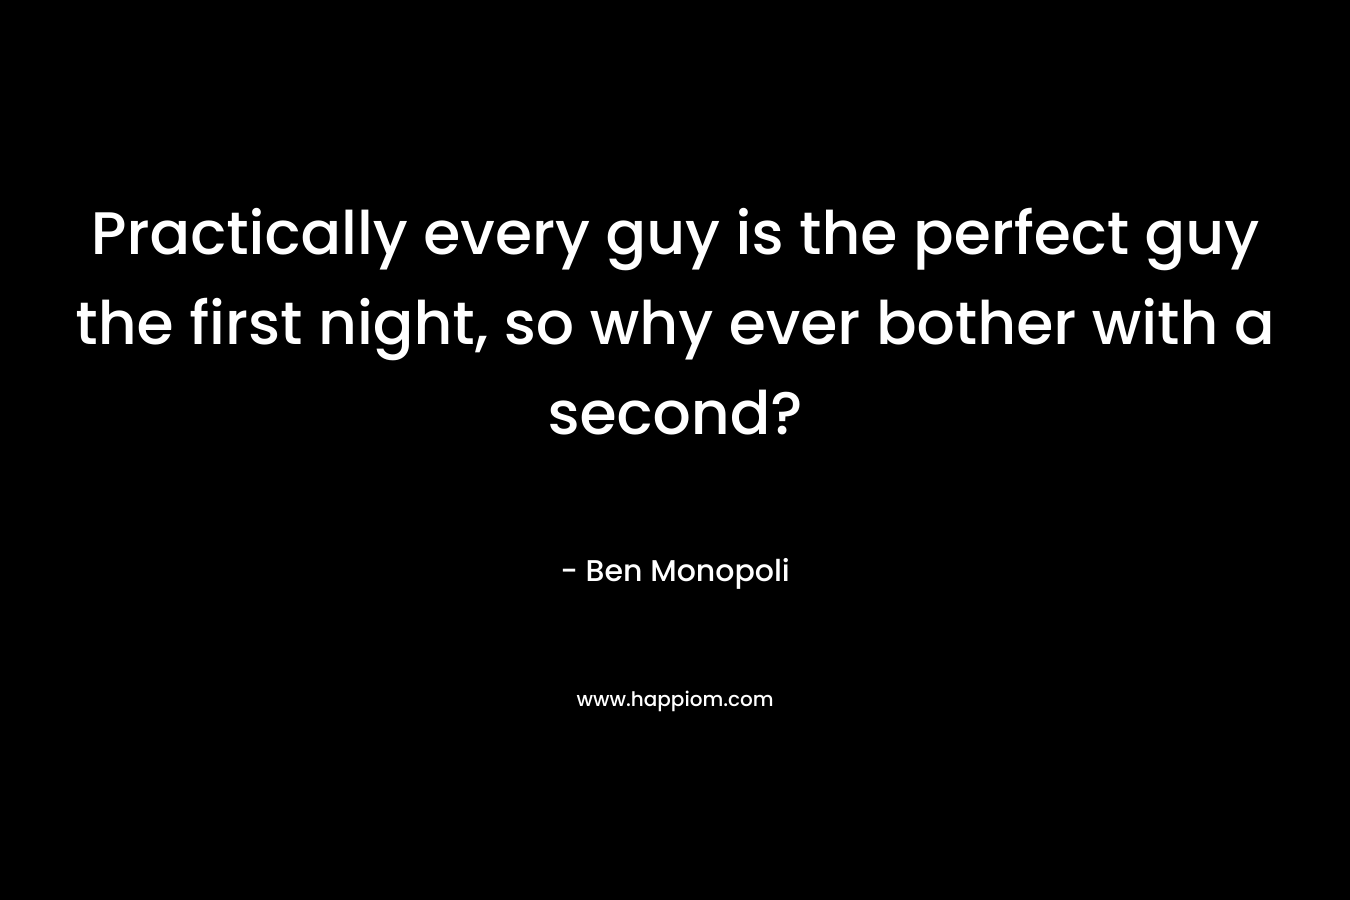 Practically every guy is the perfect guy the first night, so why ever bother with a second?